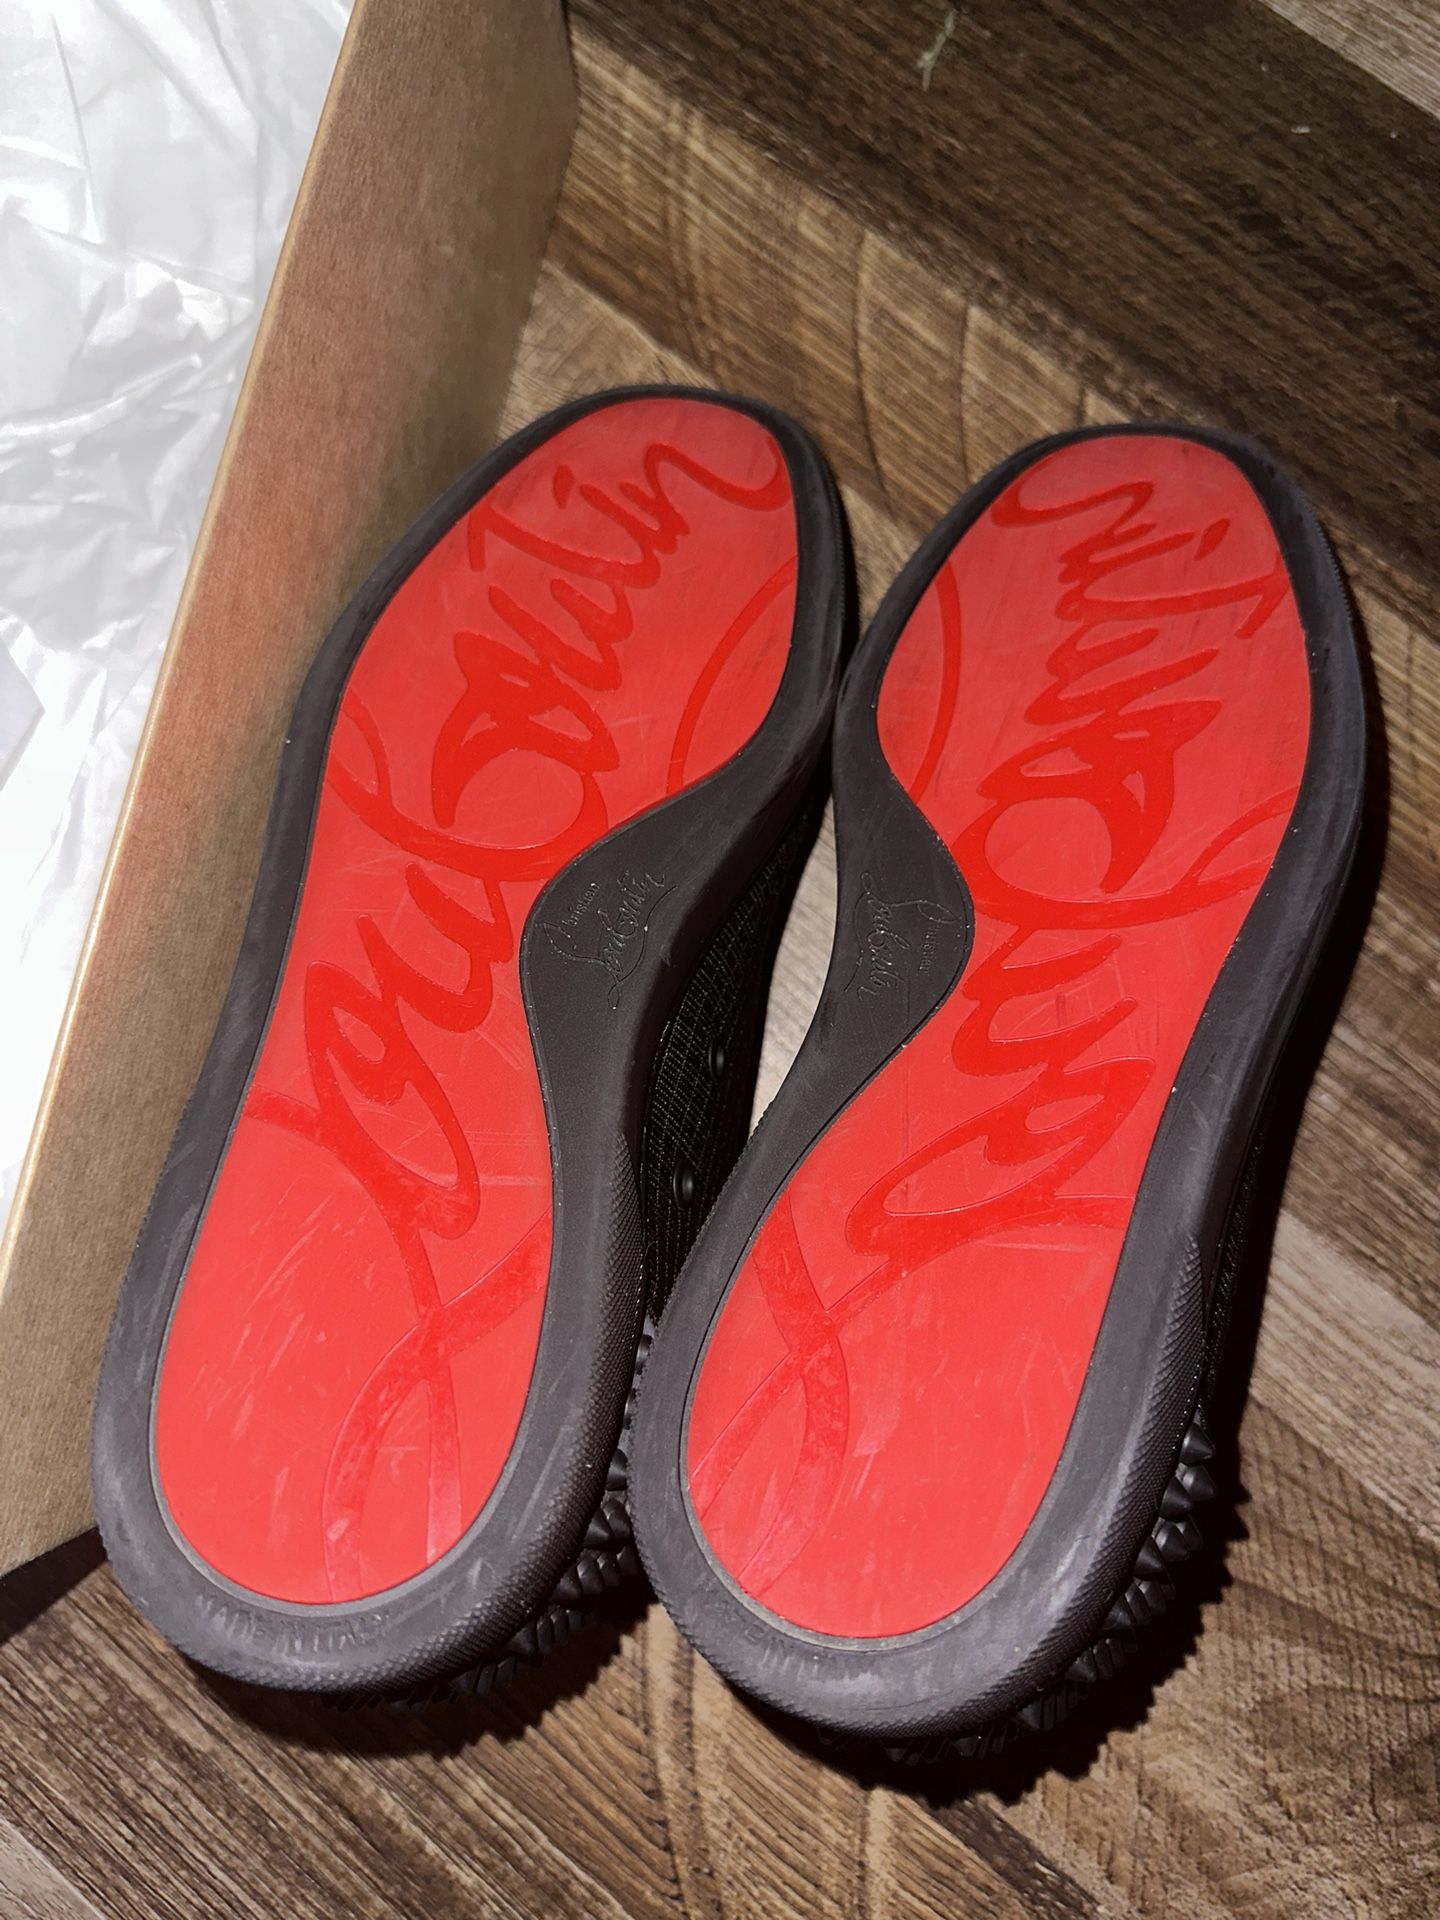 MUST SELL TODAY! CHRISTIAN LOUBOUTIN “RED BOTTOMS” MENS SHOES SIZE 12.5 for  Sale in Palm Springs, CA - OfferUp